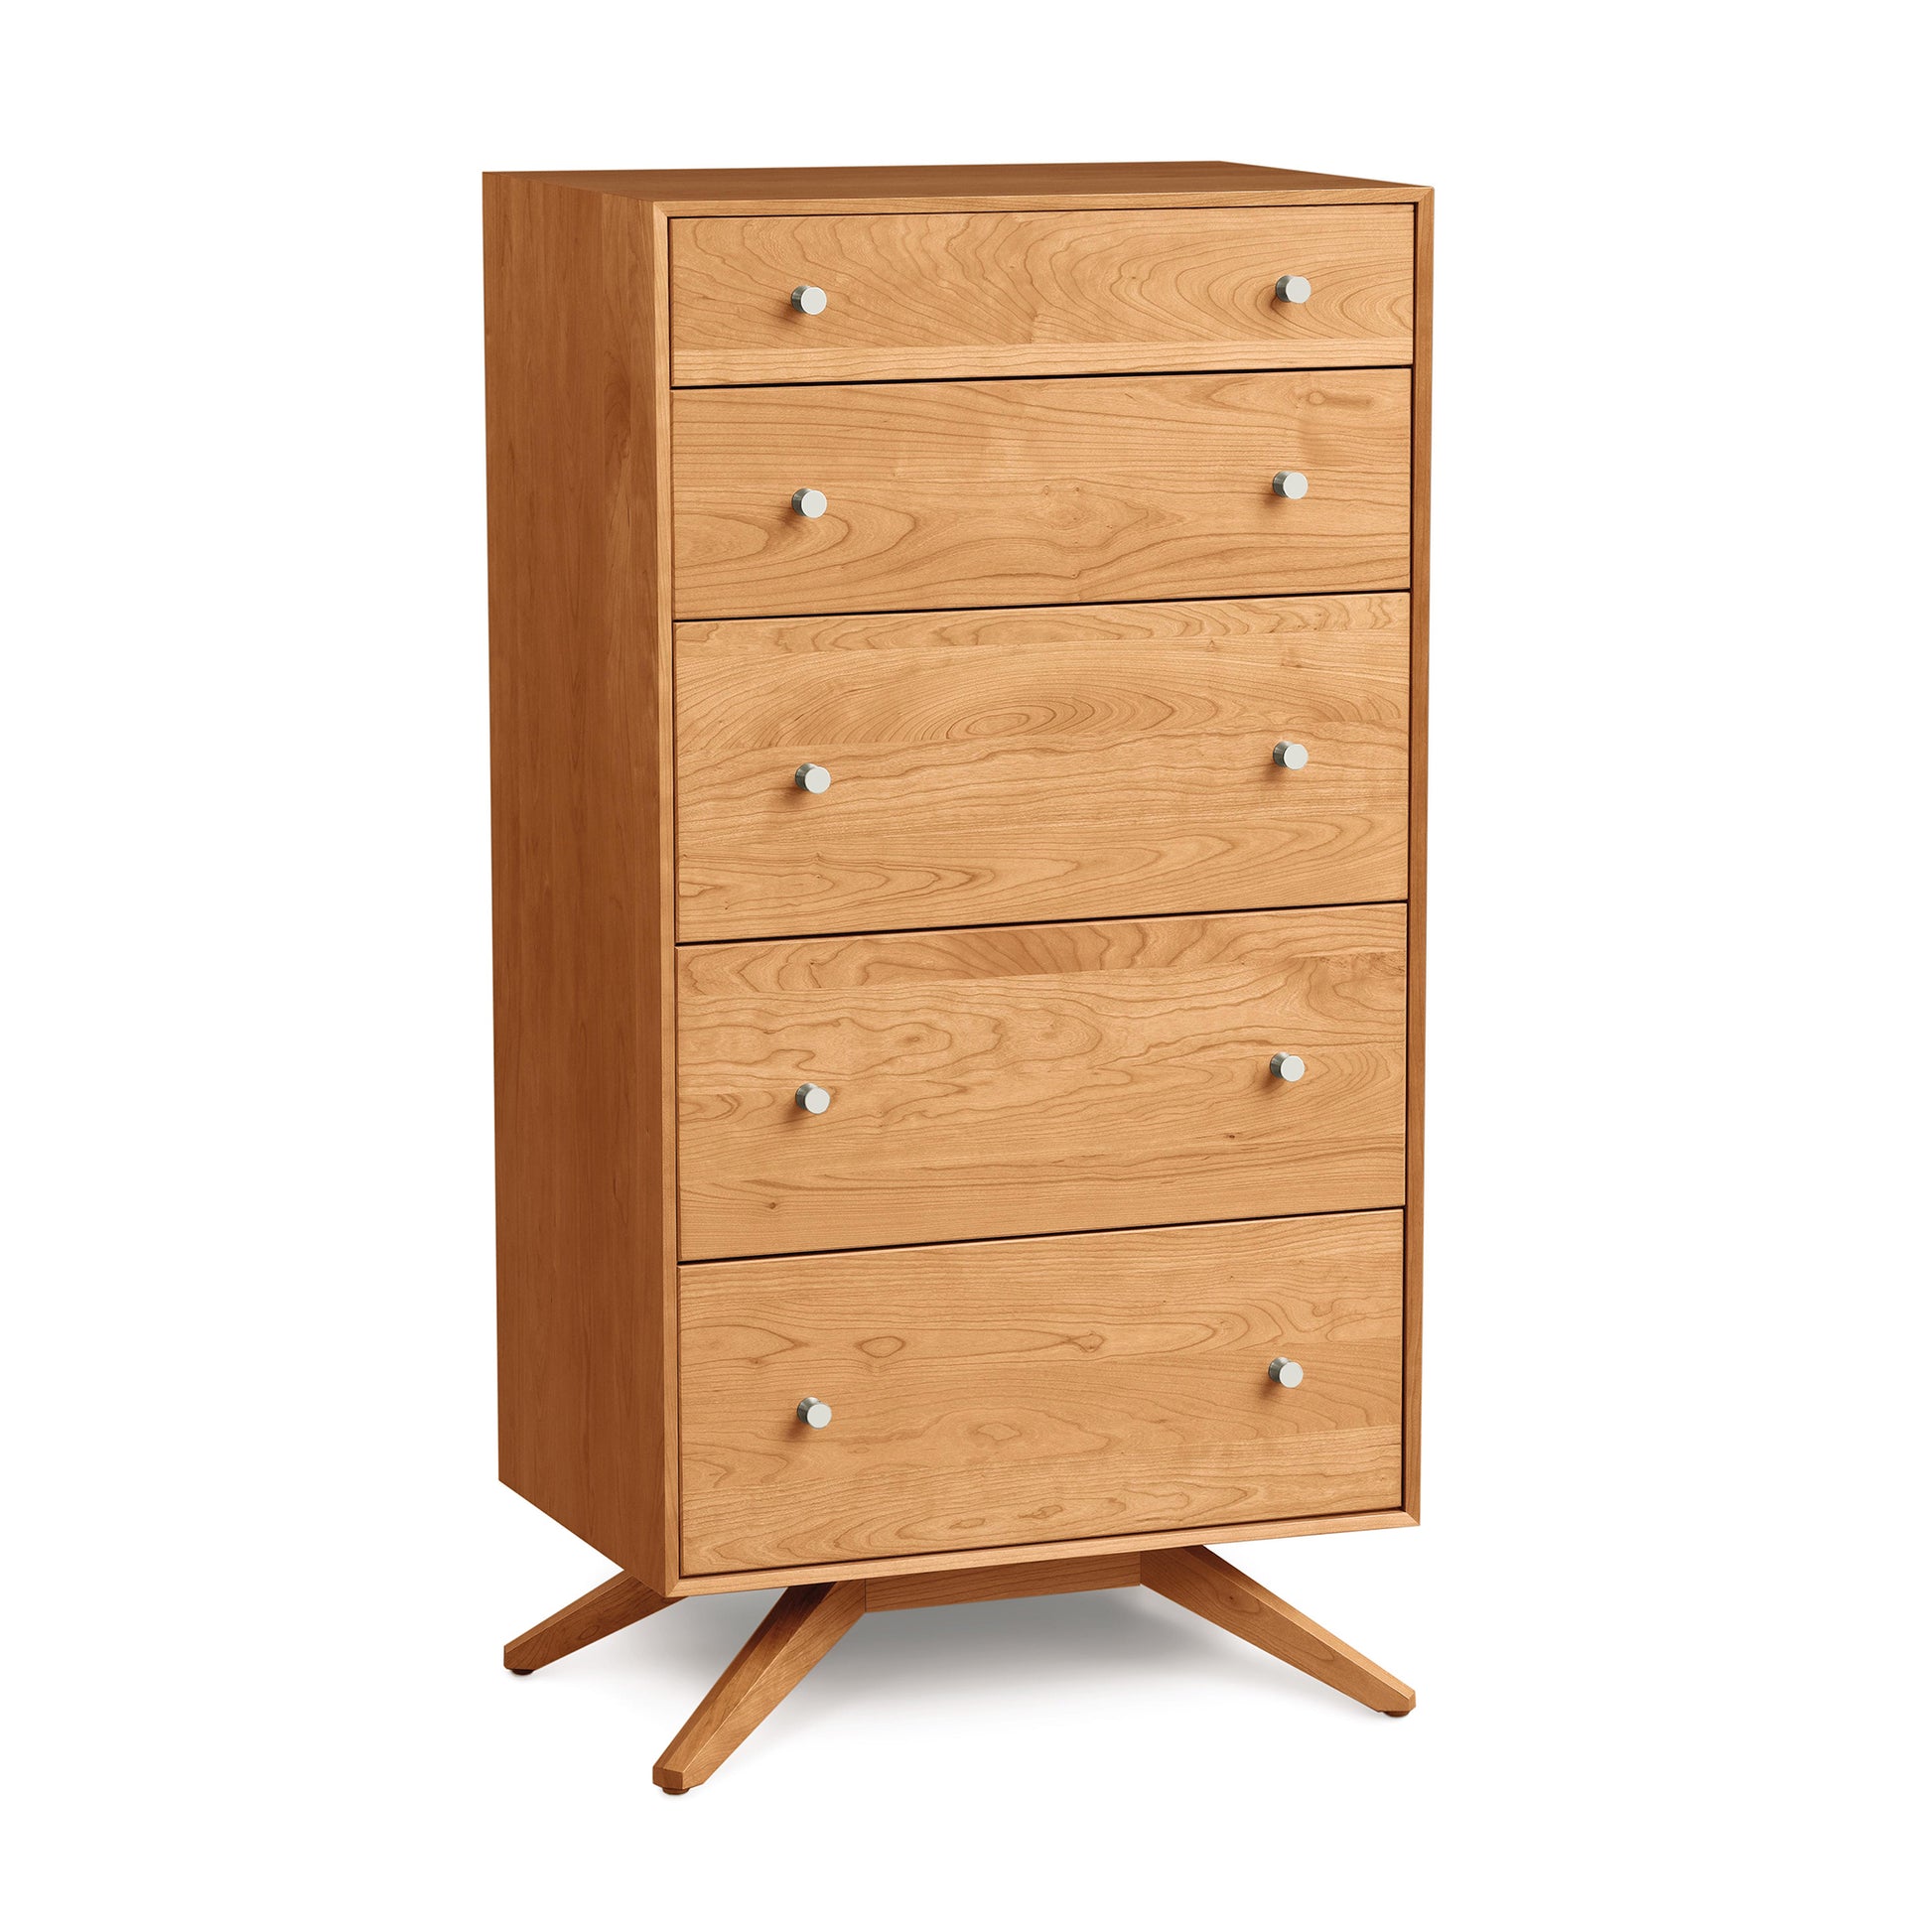 A contemporary design Copeland Furniture Astrid Cherry 5 Drawer Chest crafted from solid cherry hardwood, featuring round knobs and angled legs, isolated on a white background.